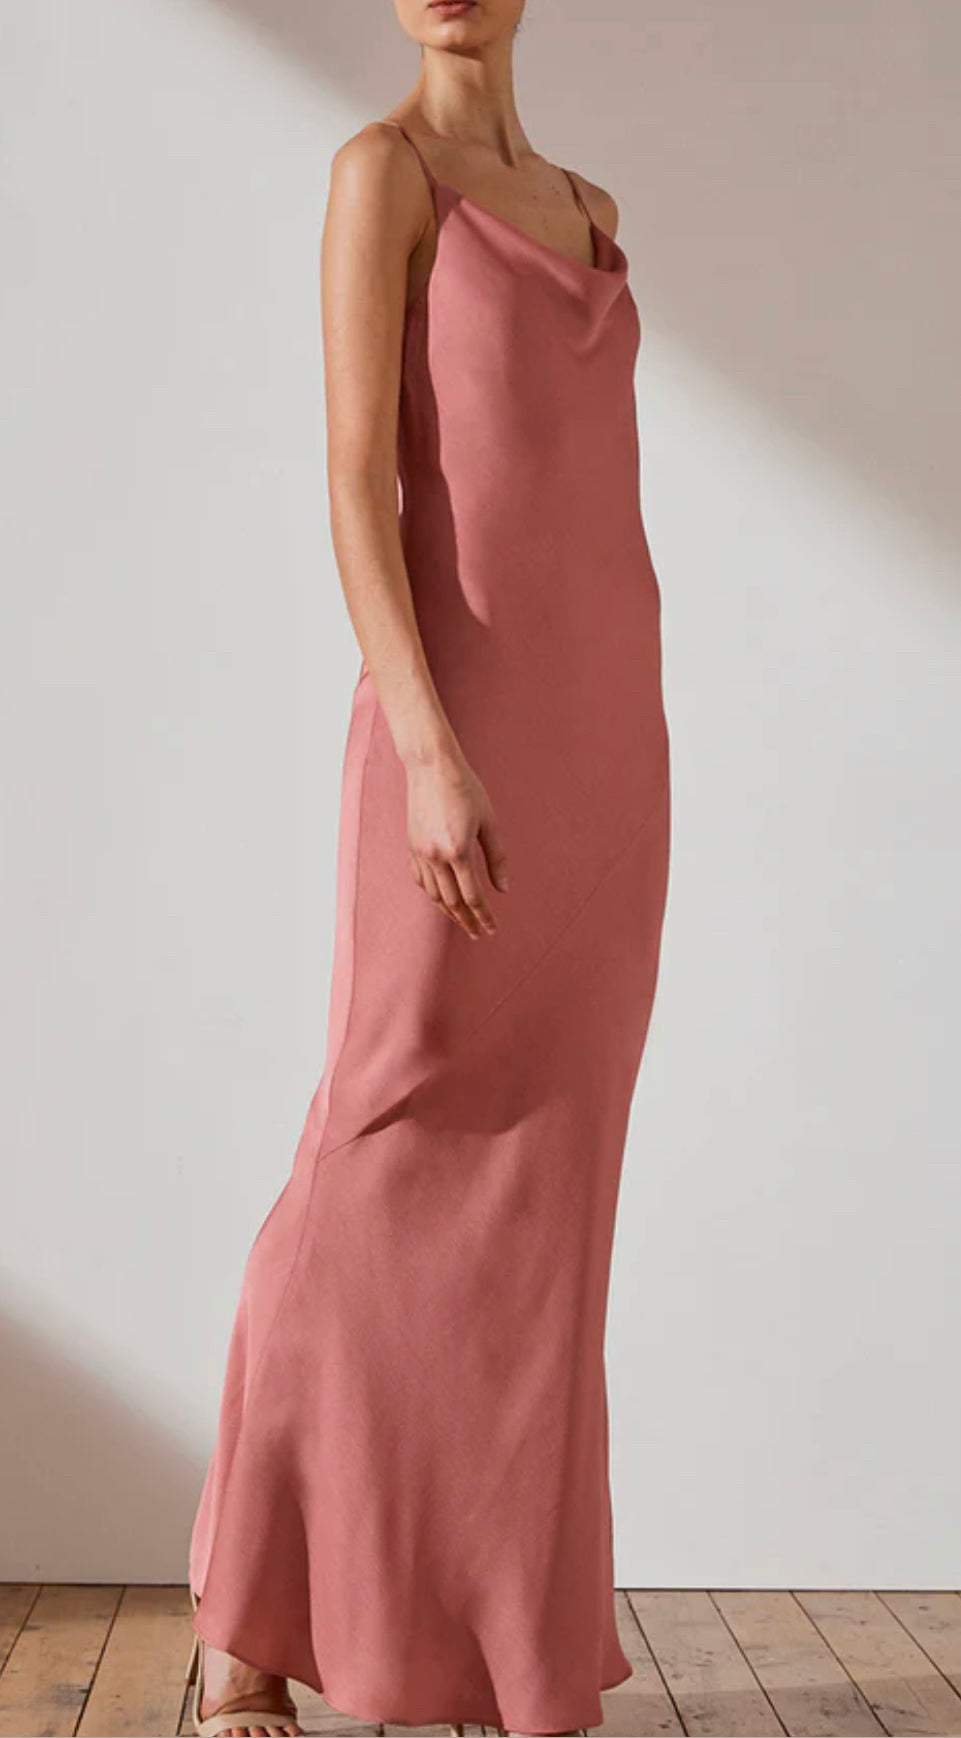 Shona Joy Luxe Bias dress in rose pink front angled view